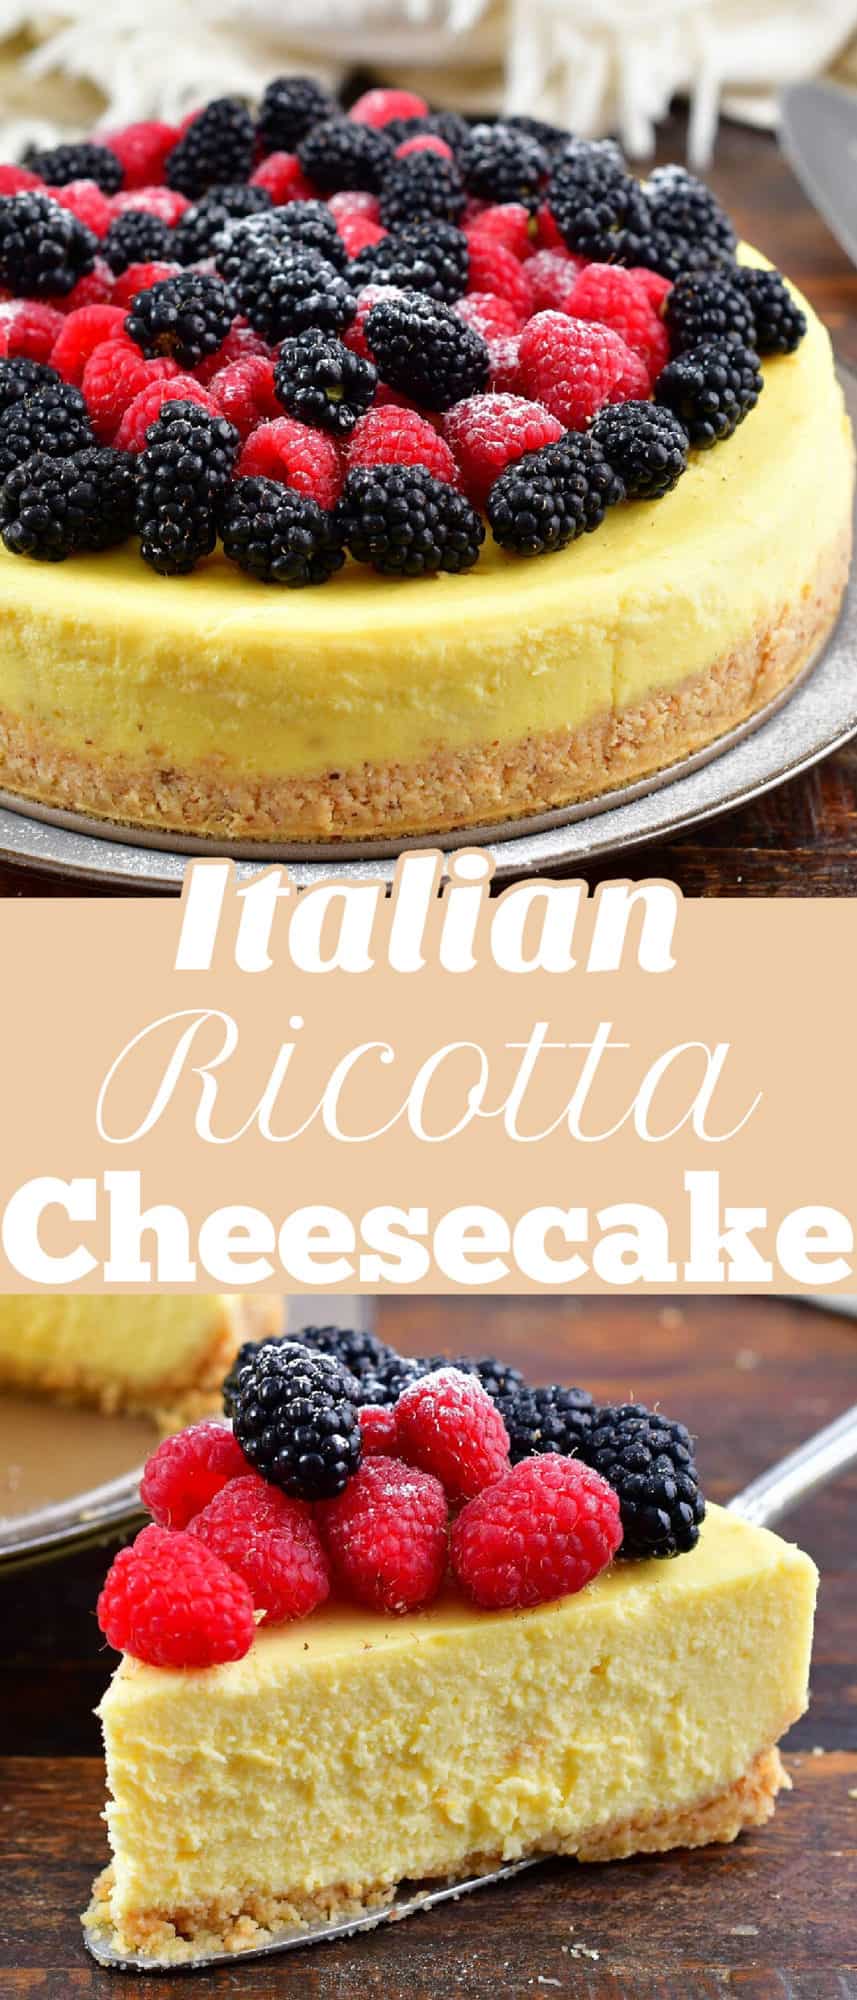 collage of two closeup images of whole ricotta cheesecake and a slice